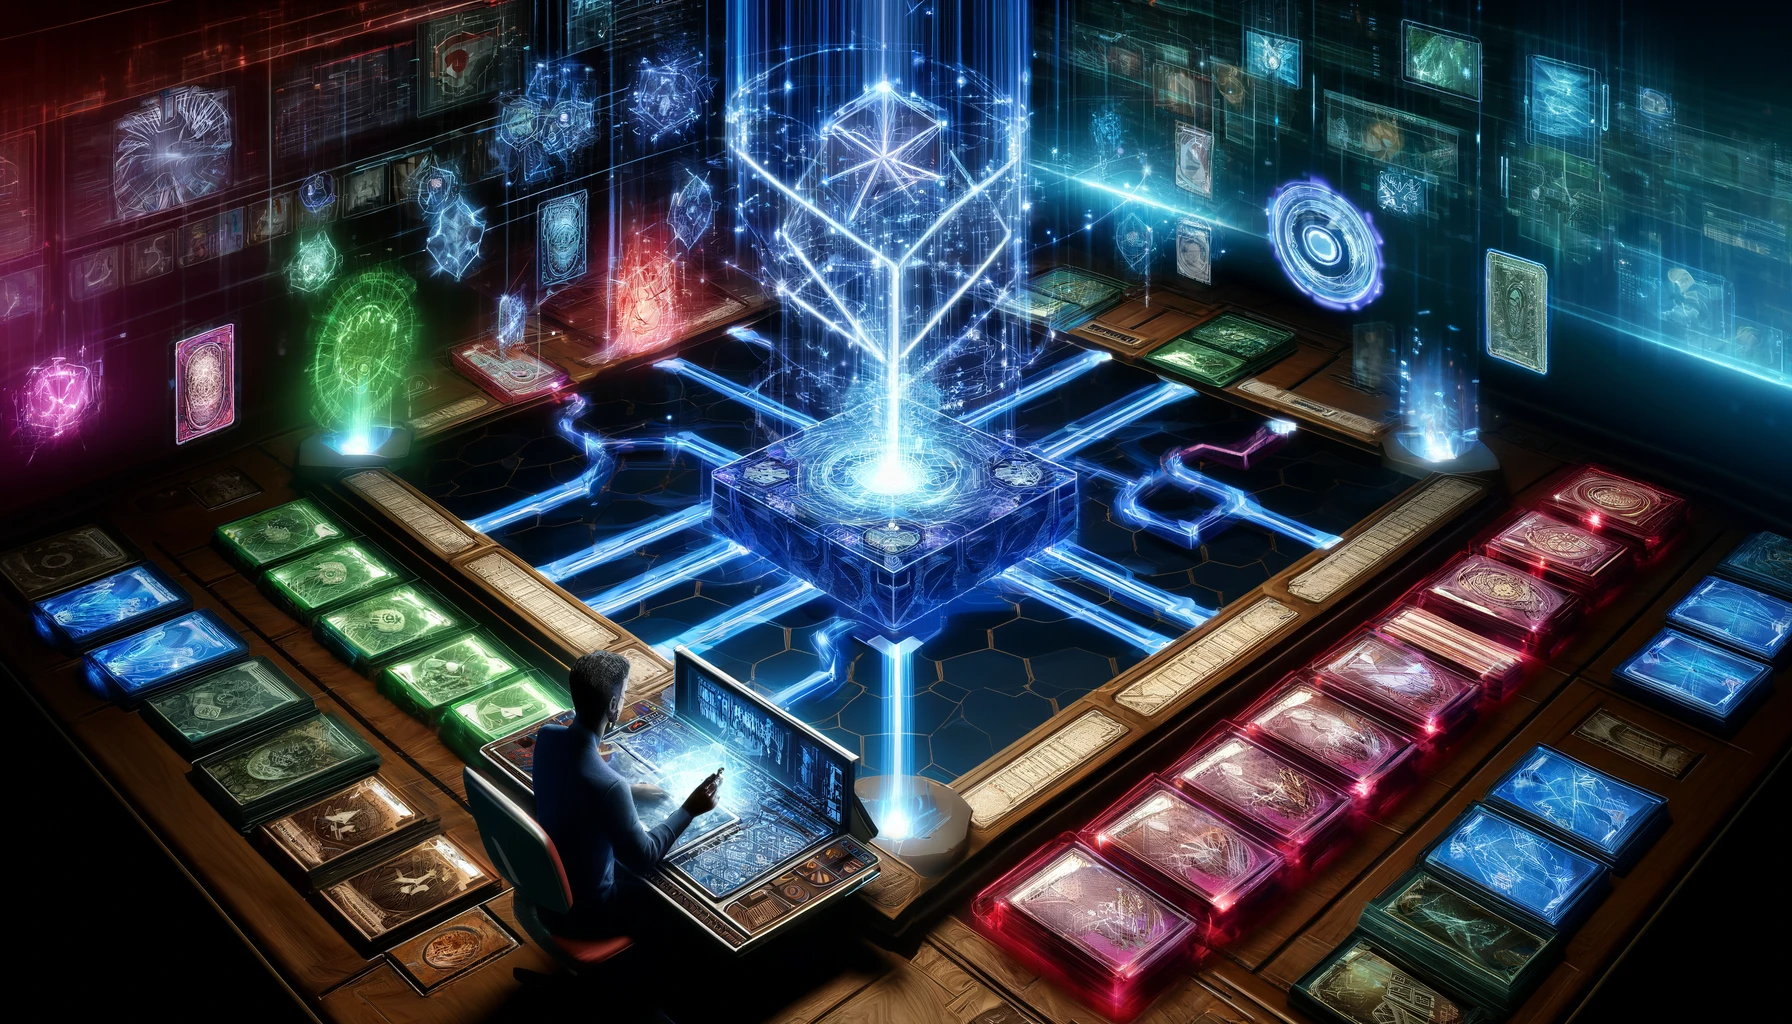 A vivid, wide-format image of a futuristic strategist at a high-tech command center, manipulating a holographic interface that shows multiple paths of gameplay, symbolizing the deck's flexibility and strategic depth across various scenarios.